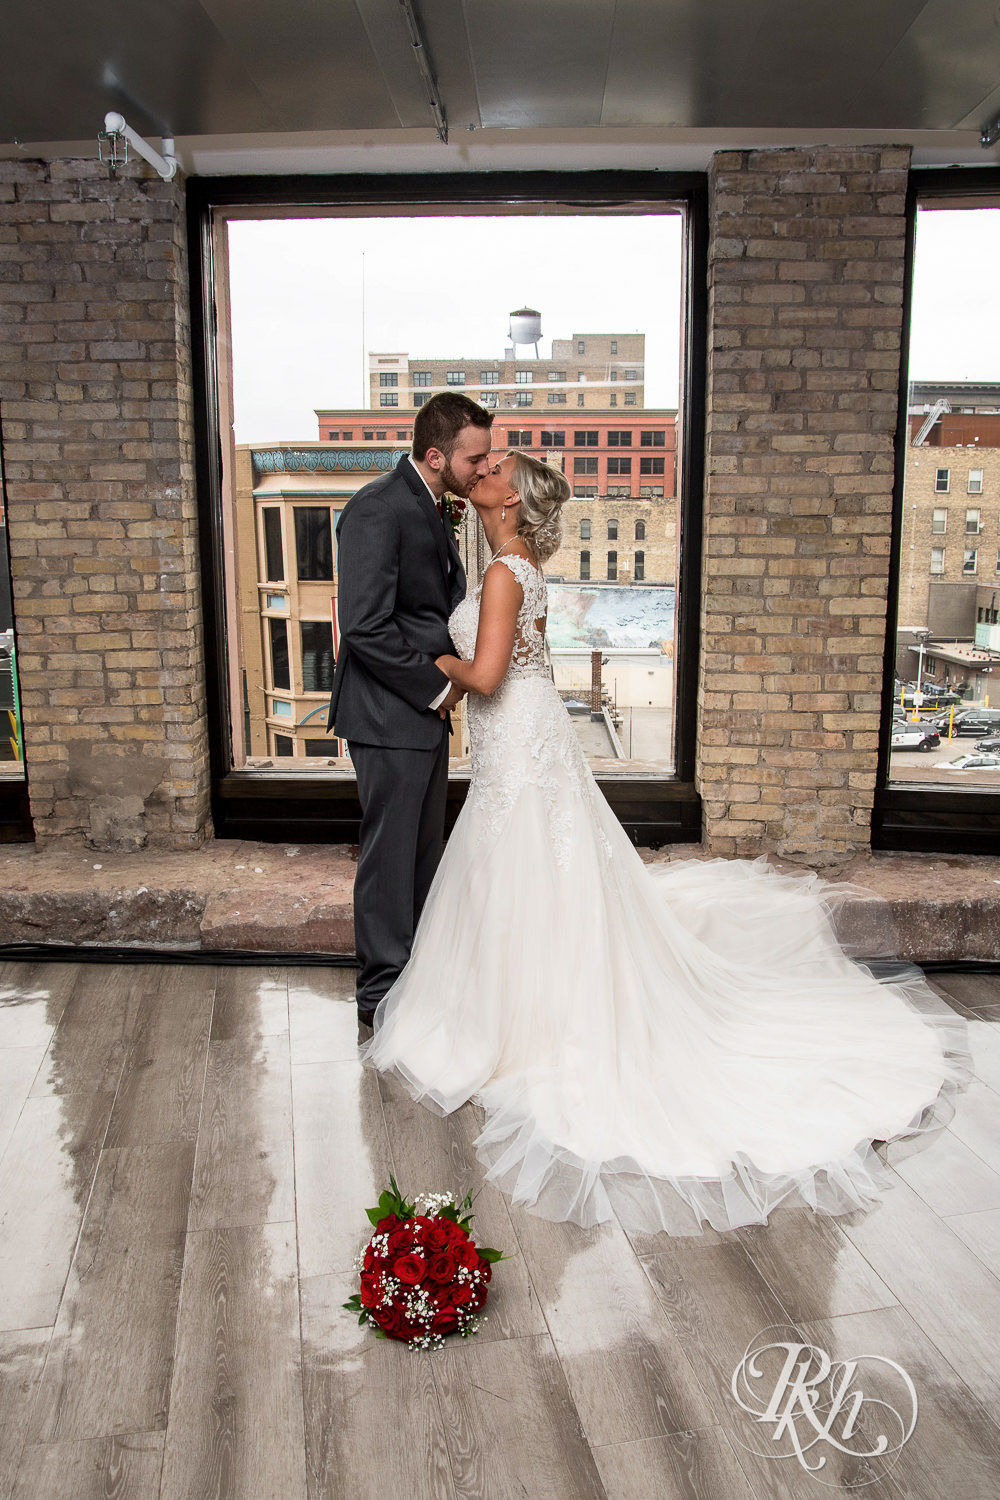 Bride and groom kiss on wedding day at Lumber Exchange Event Center in Minneapolis, Minnesota.